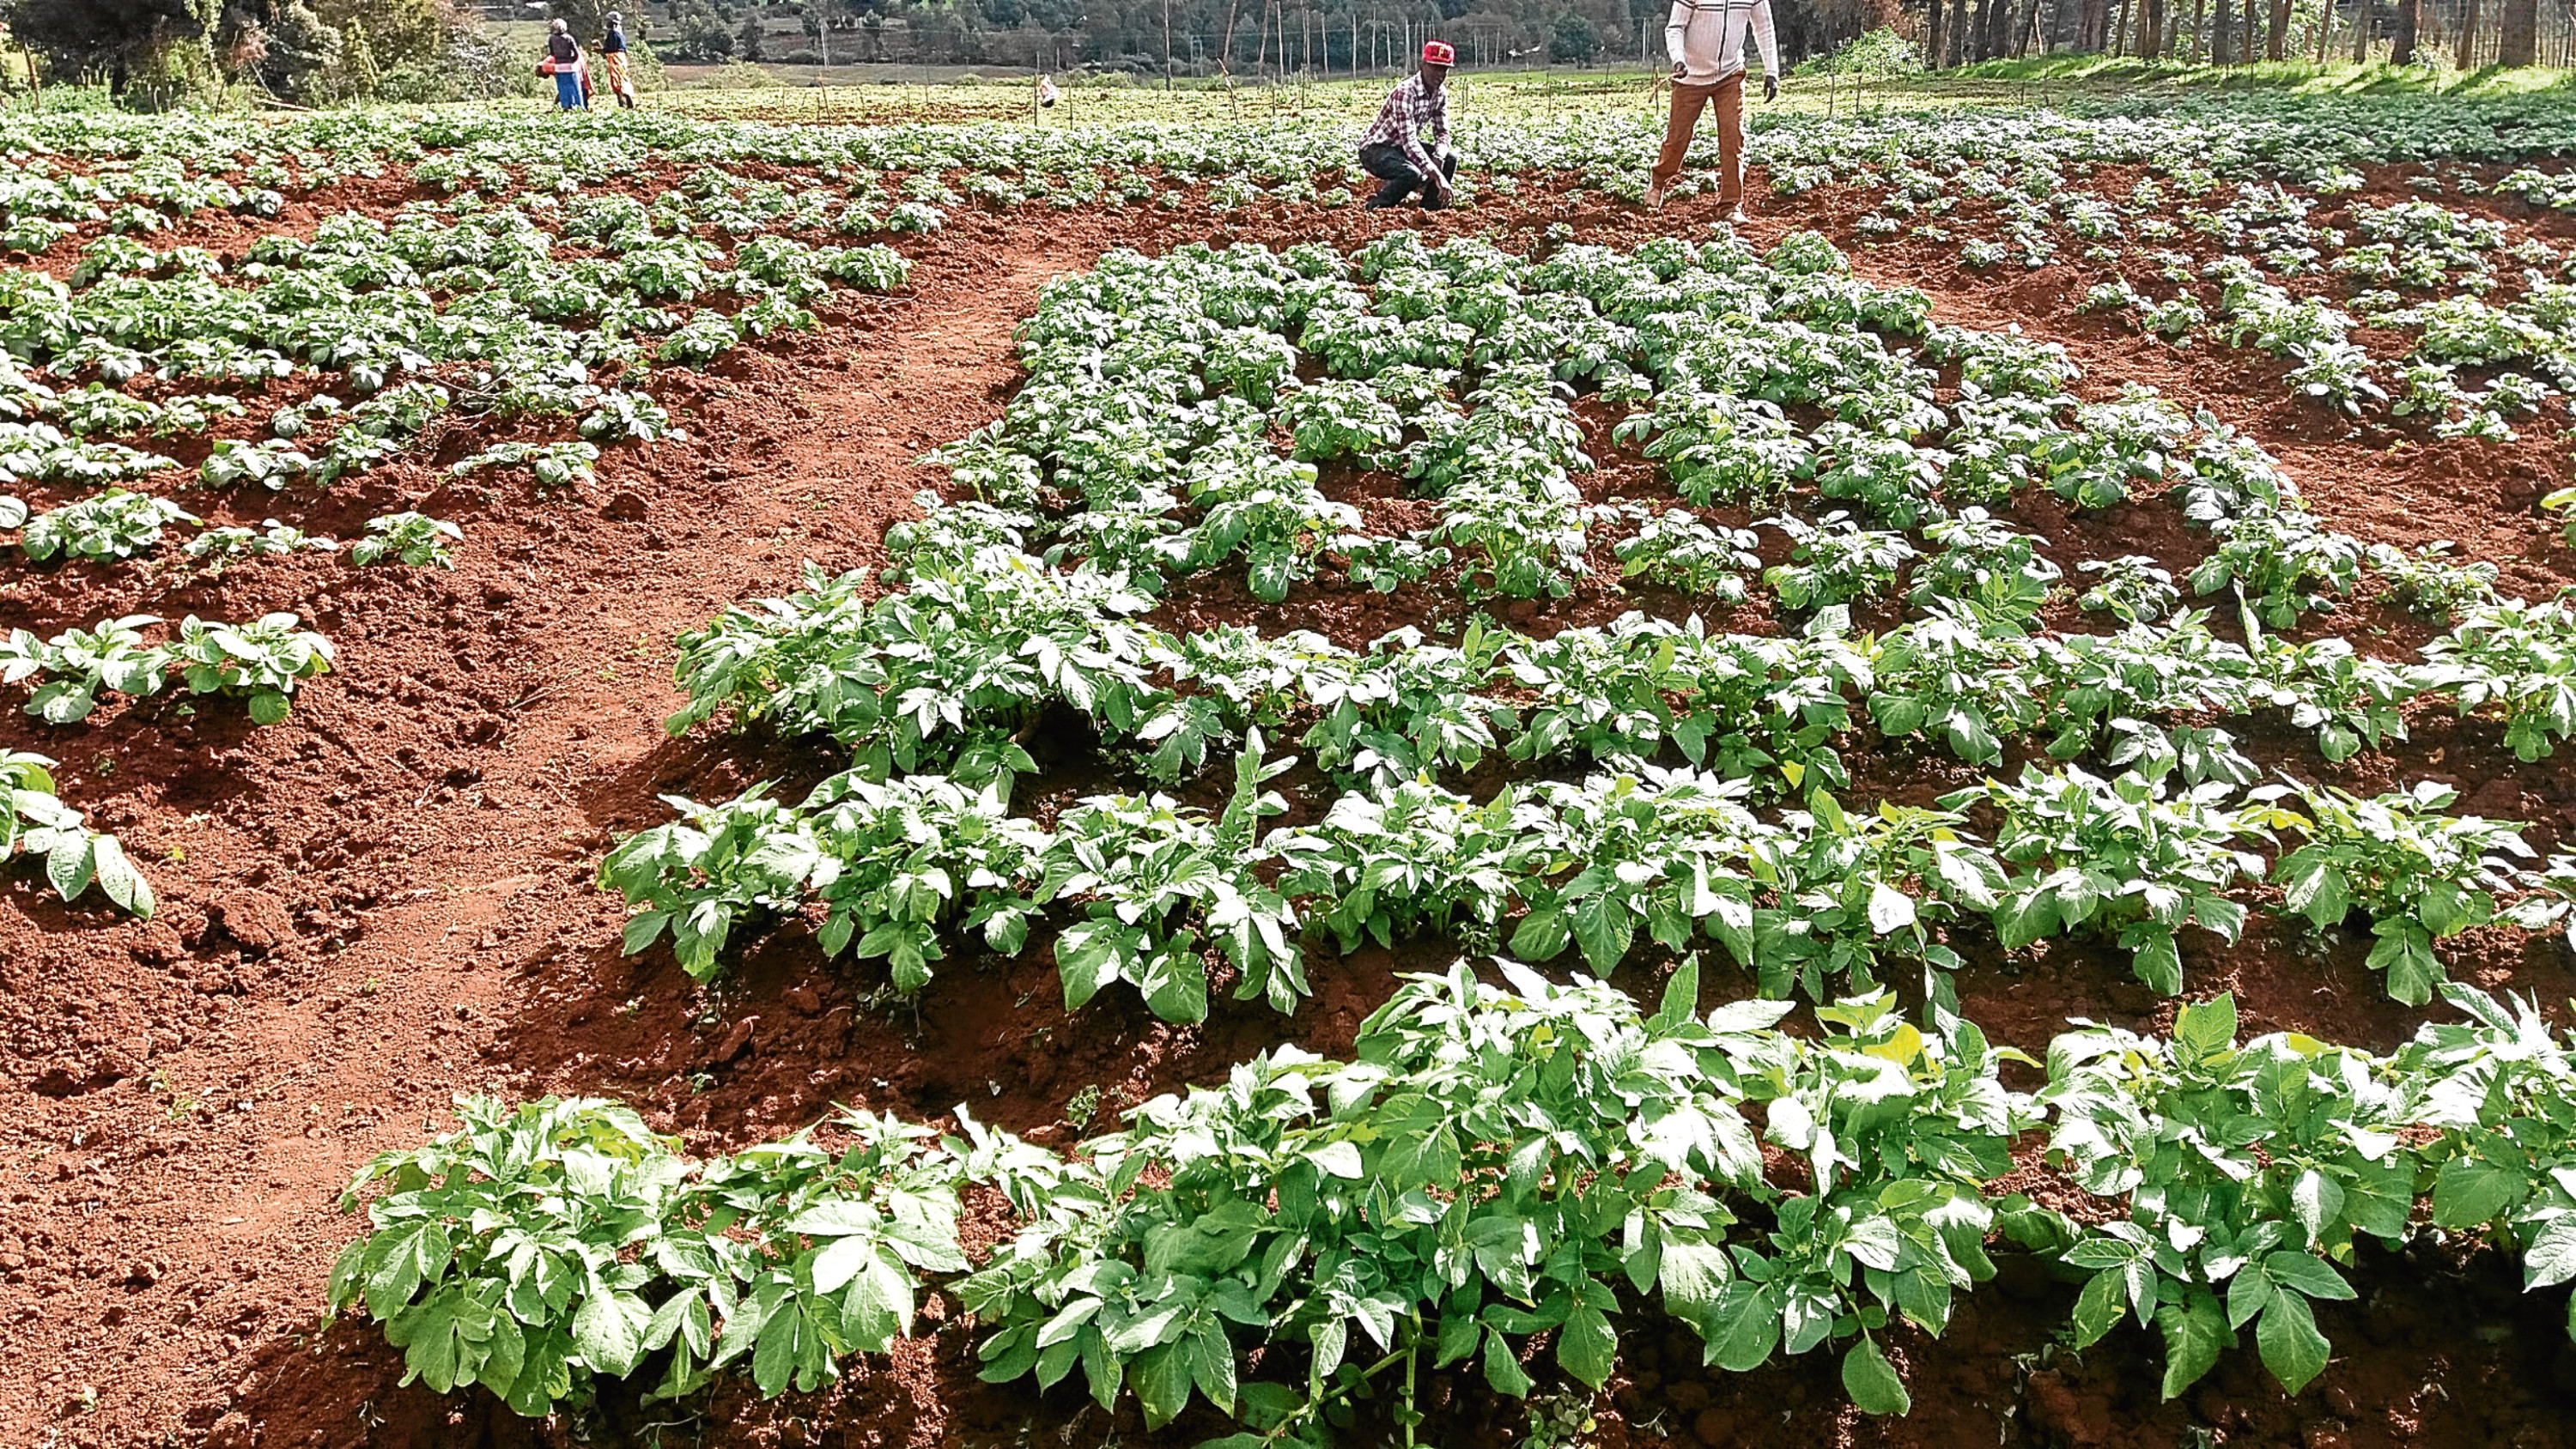 Some of the potato trials in Kenya.